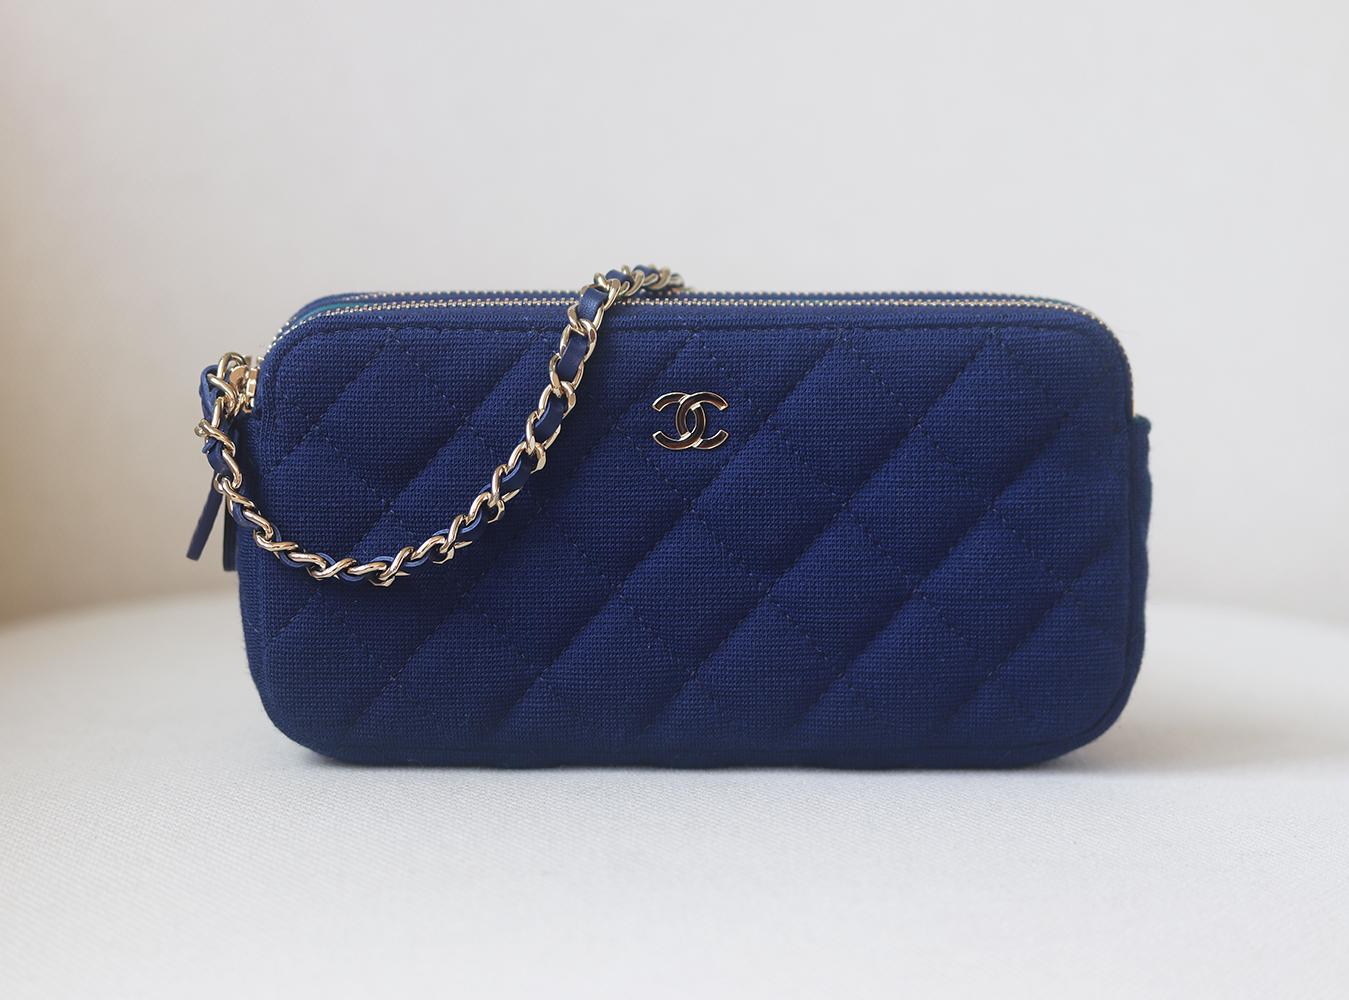 Chanel Clutch with Chain bag has been hand-finished by skilled artisans in the label's workshop.
Boasting a cotton-blend quilted exterior, this structured design is accented with silver-toned and leather chain strap.
Made in France from cotton-blend